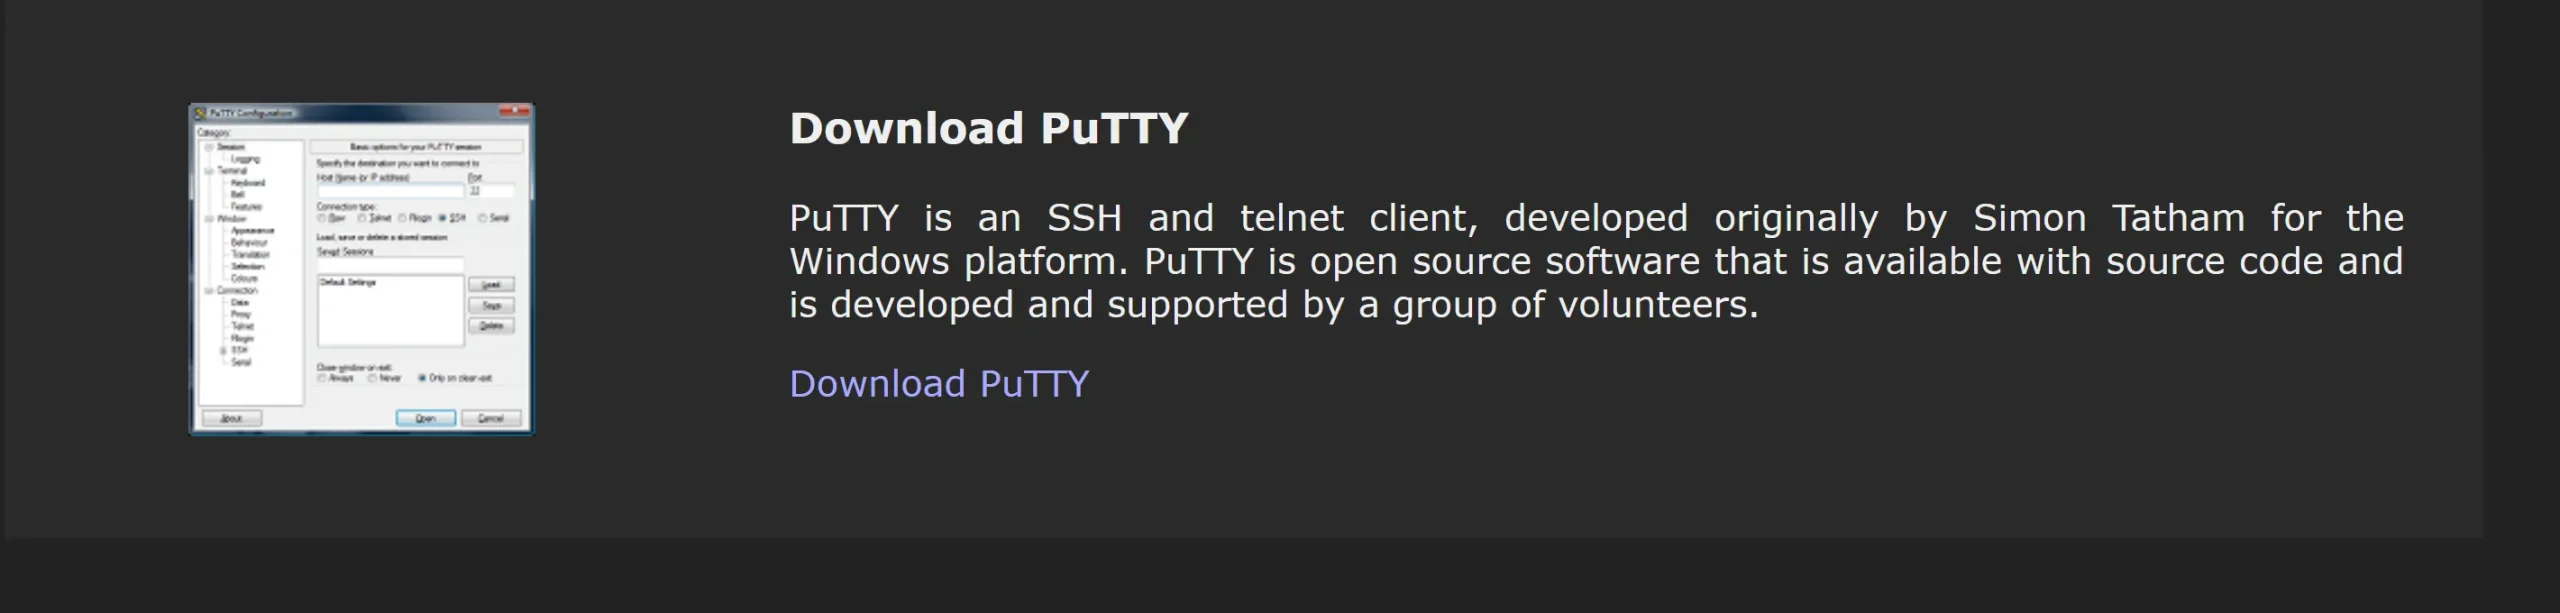 Download Putty for Windows